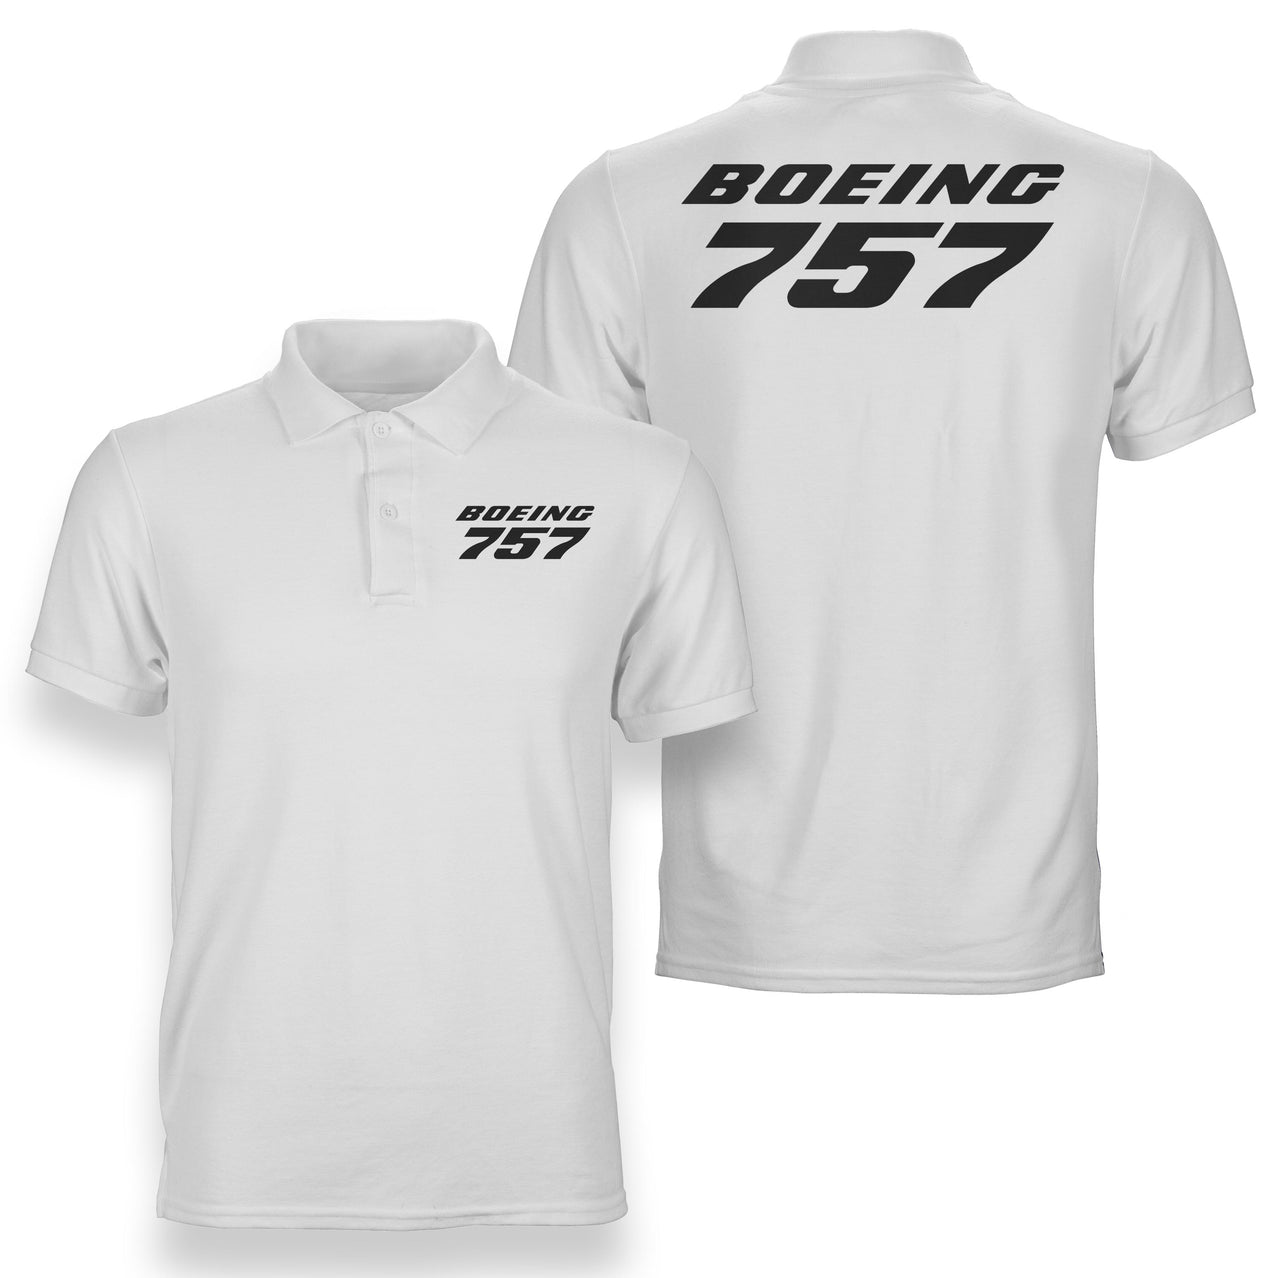 Boeing 757 & Text Designed Double Side Polo T-Shirts